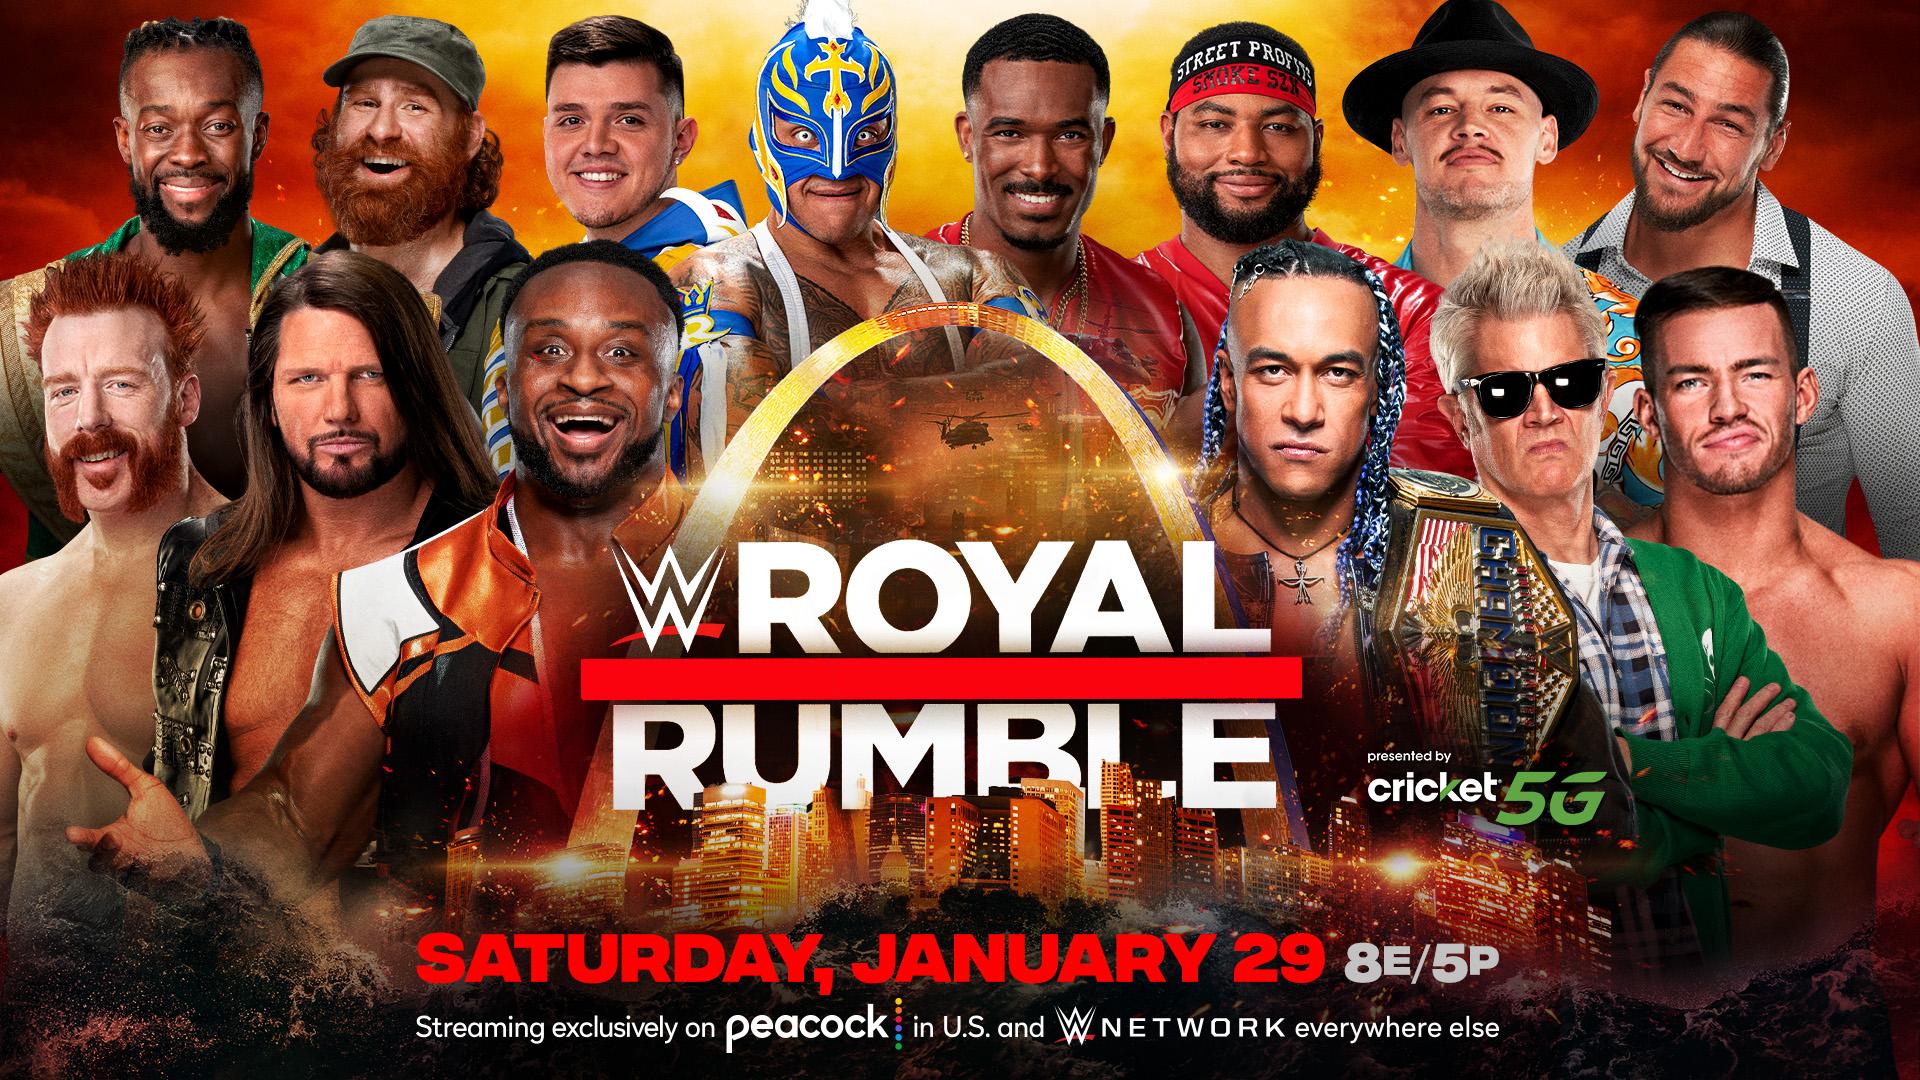 What If...?: 2022 Men's Royal Rumble match edition